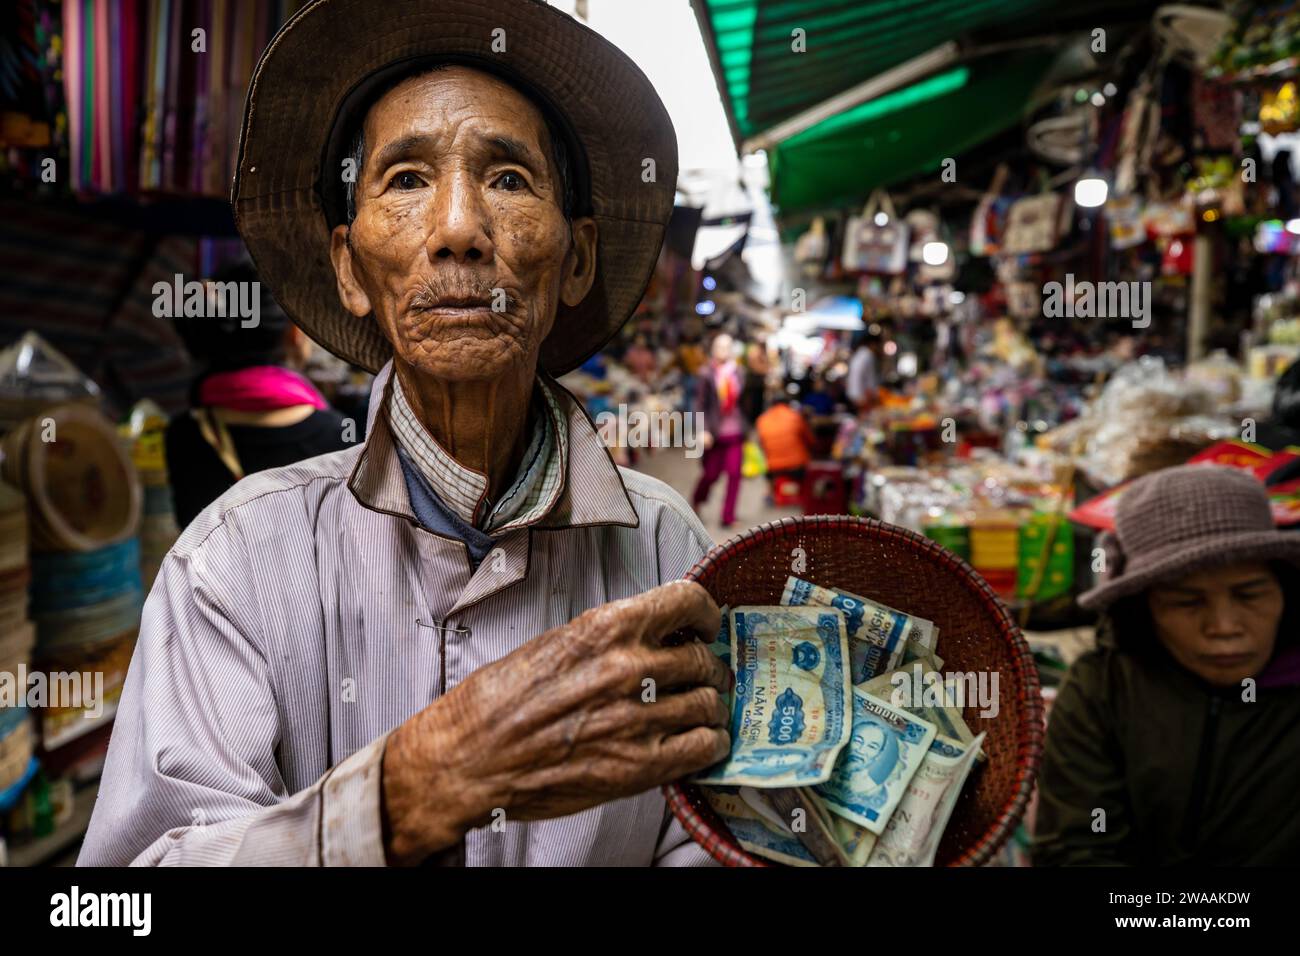 Poverty and poor people in Vietnam Stock Photo